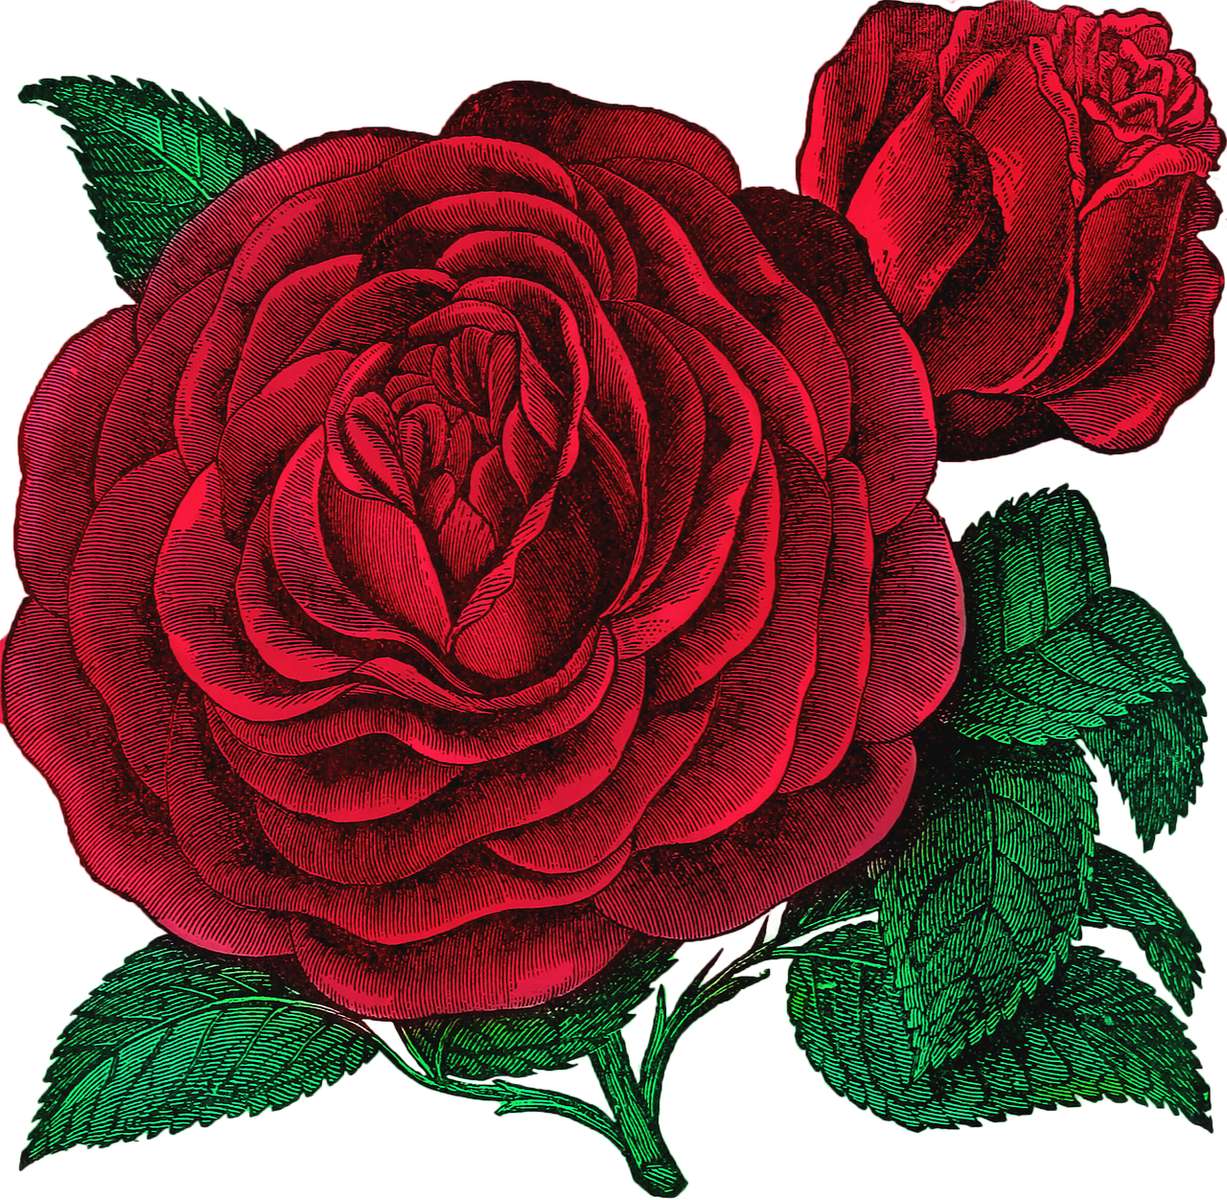 the rose that I love the most online puzzle